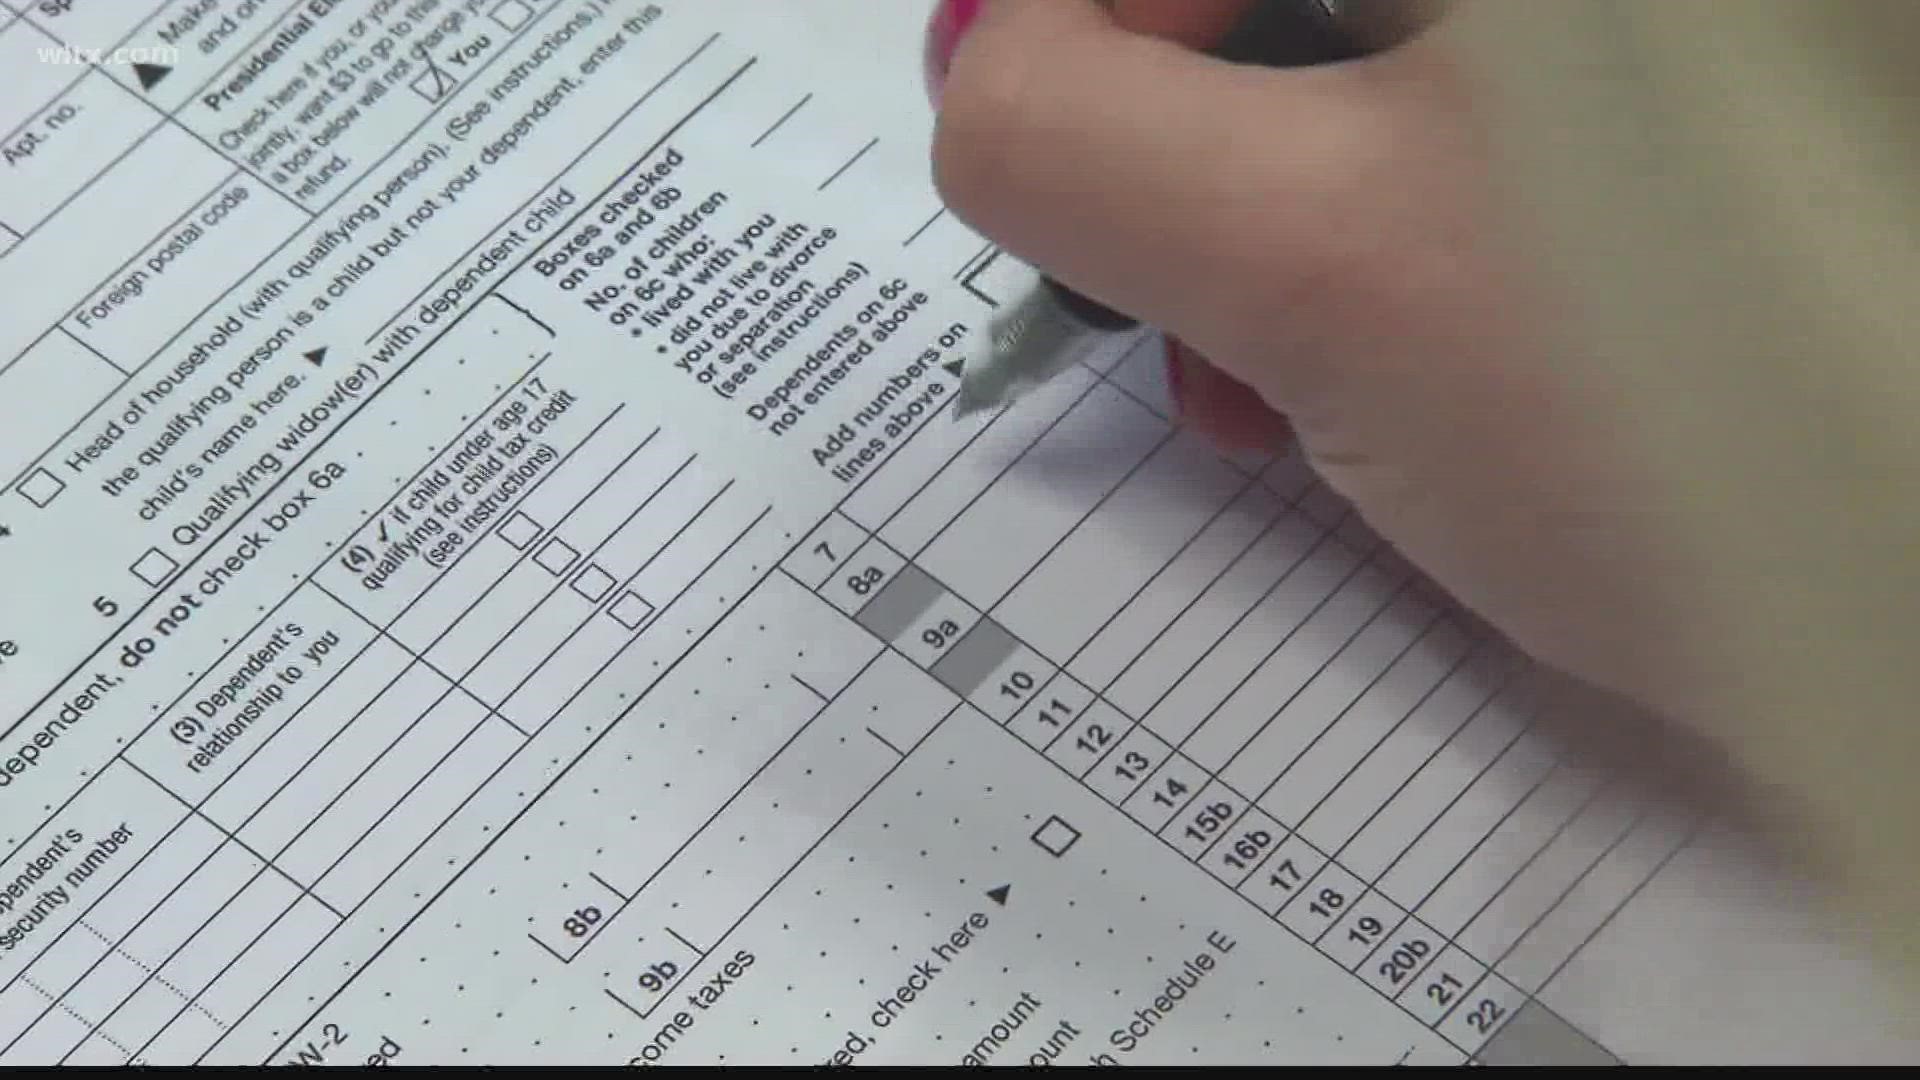 The deadline to file taxes this year is on Monday, April 18. If you haven't filed your taxes yet in South Carolina, here are things to know.